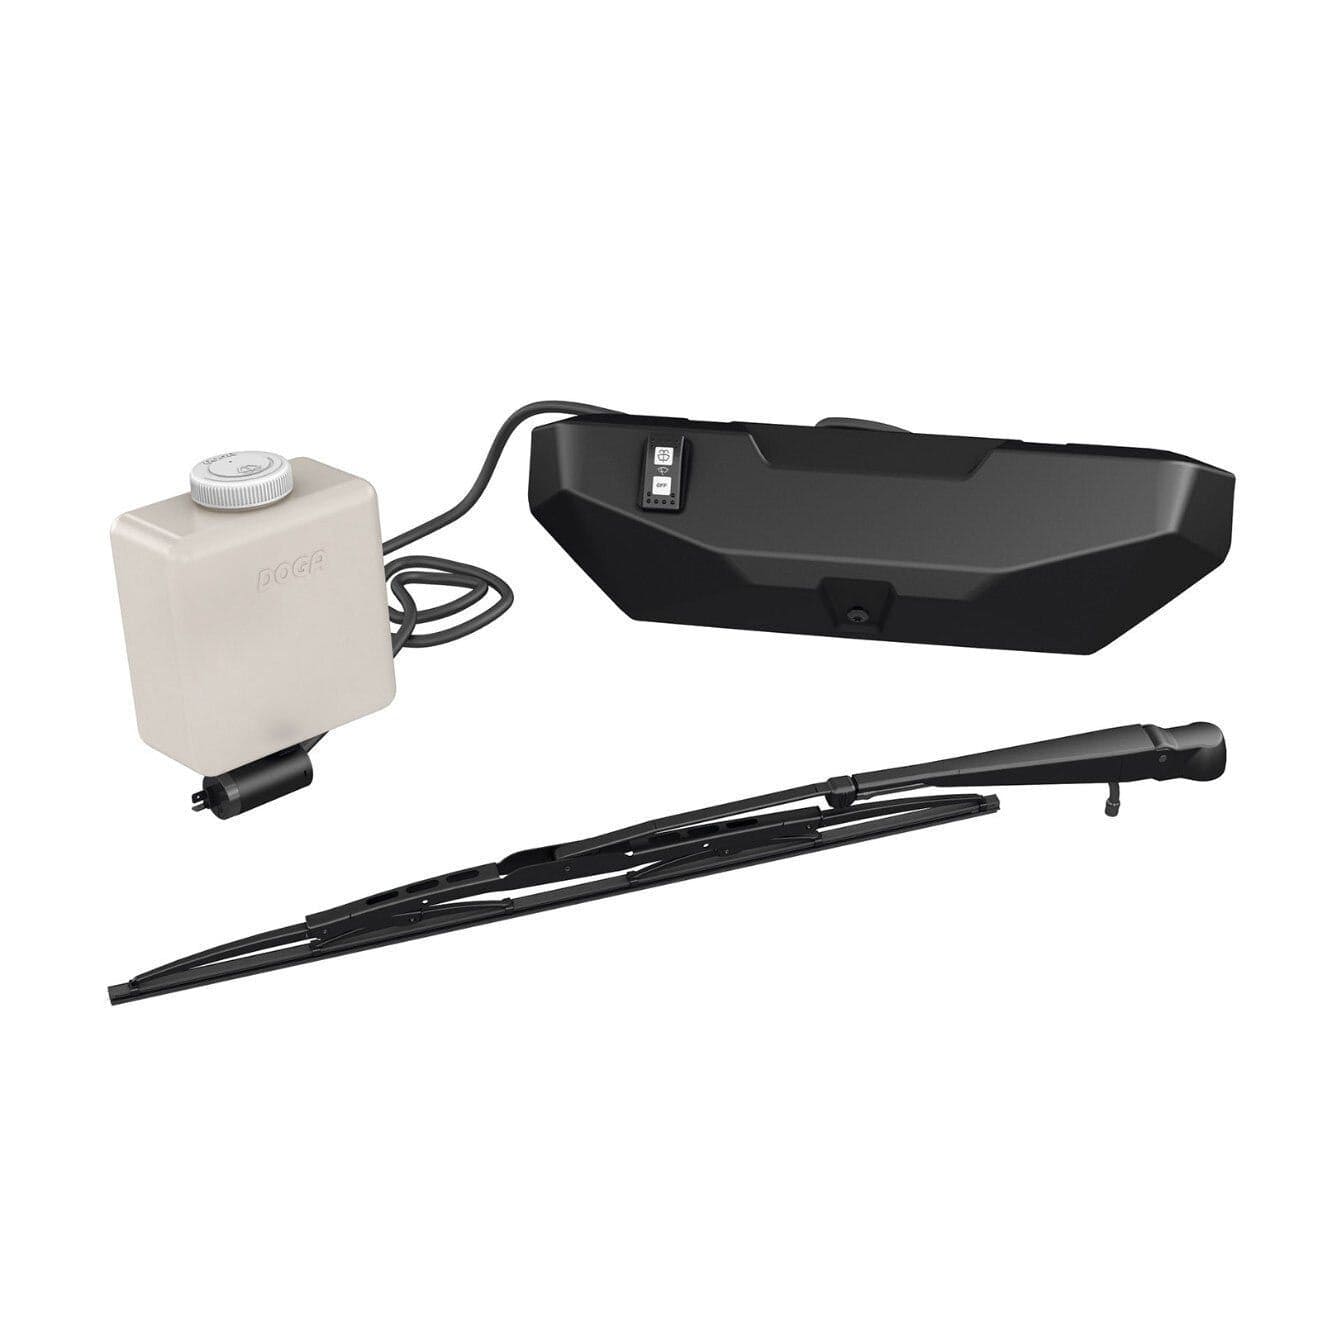 Windshield Wiper And Washer Kit - Defender